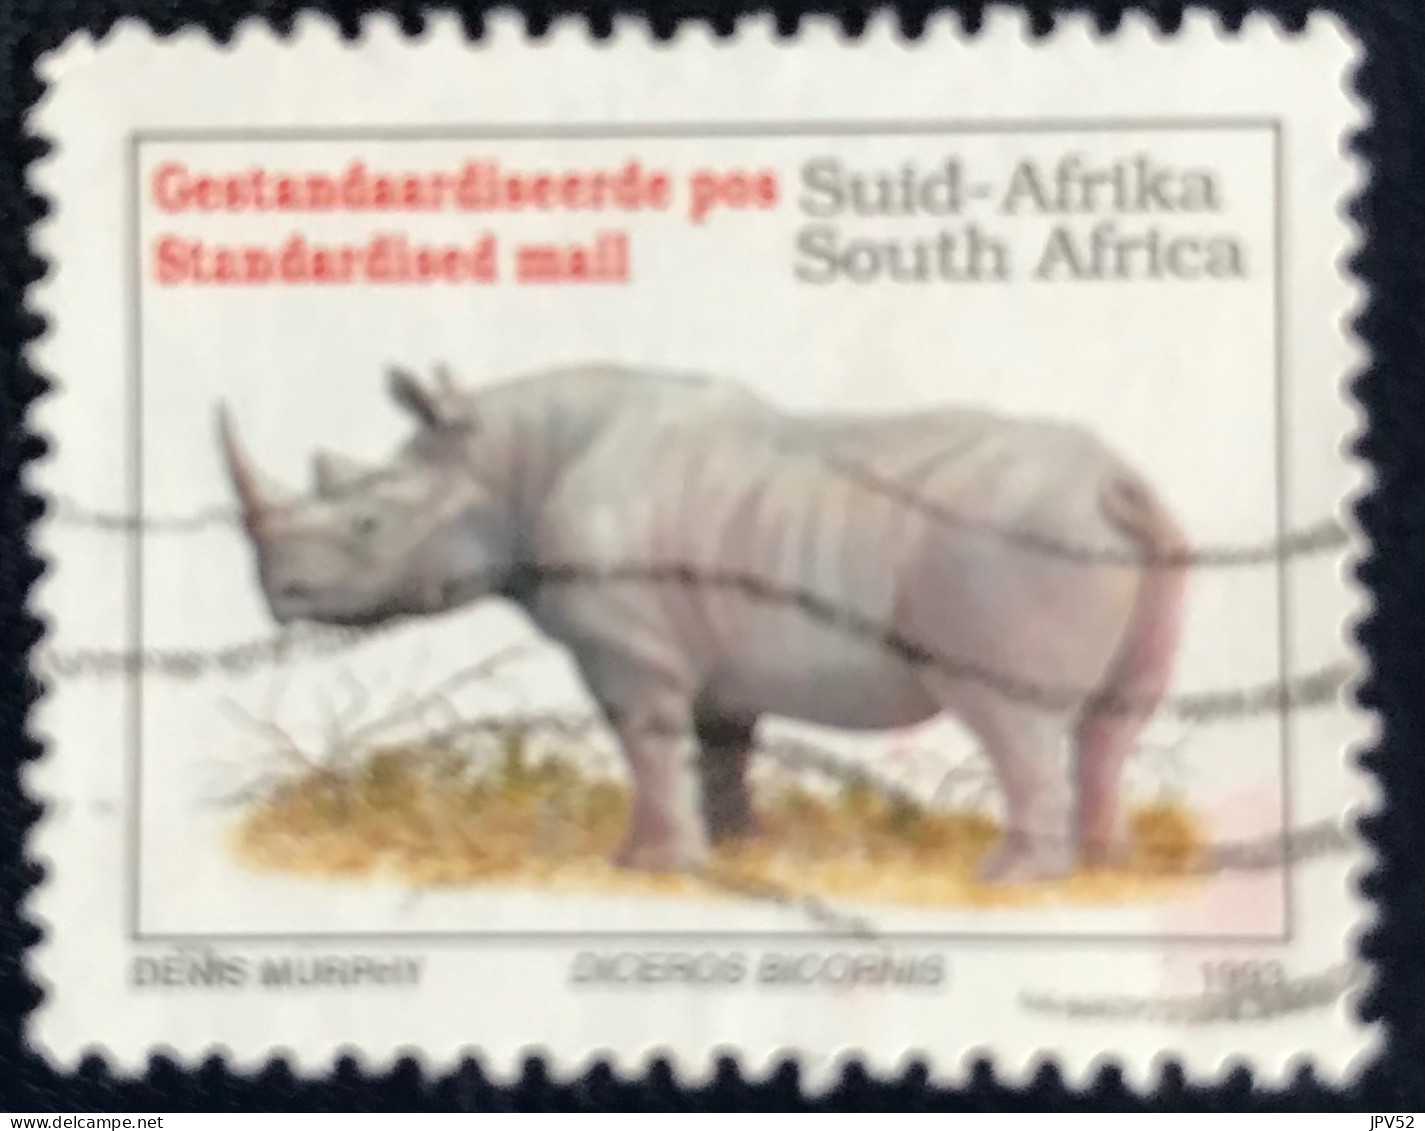 RSA - South Africa - Suid-Afrika  - C18/8 - 1996 - (°)used - Michel 896 - Bedreigde Dieren - Used Stamps